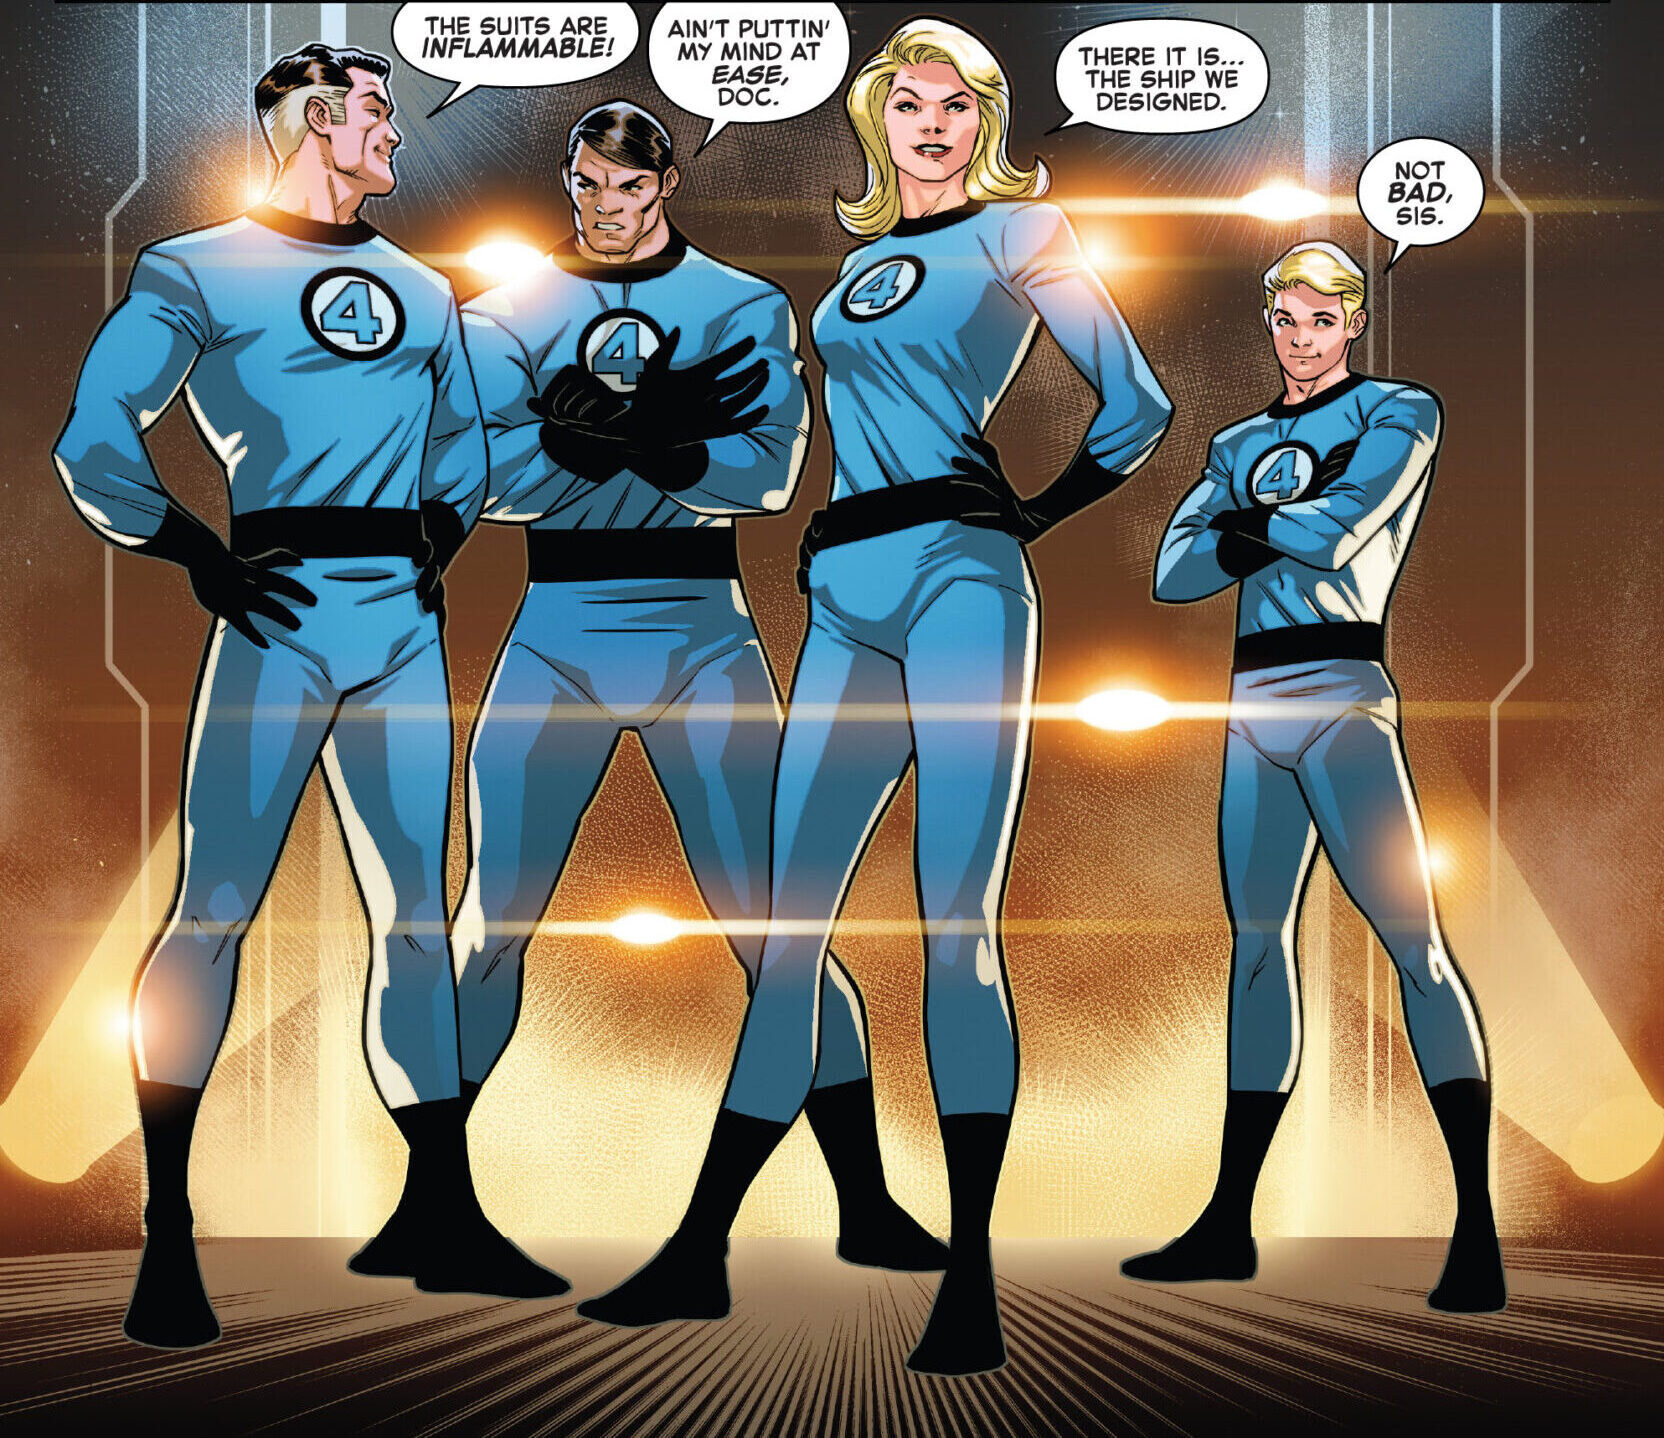 Marvel's first family gets ready to make their public debut via Fantastic Four: Life Story Vol. 1 #1 "The '60s" (2021), Marvel Comics. Words by Mark Russell, art by Sean Izaakse, Nolan Woodard, and Joe Caramagna.